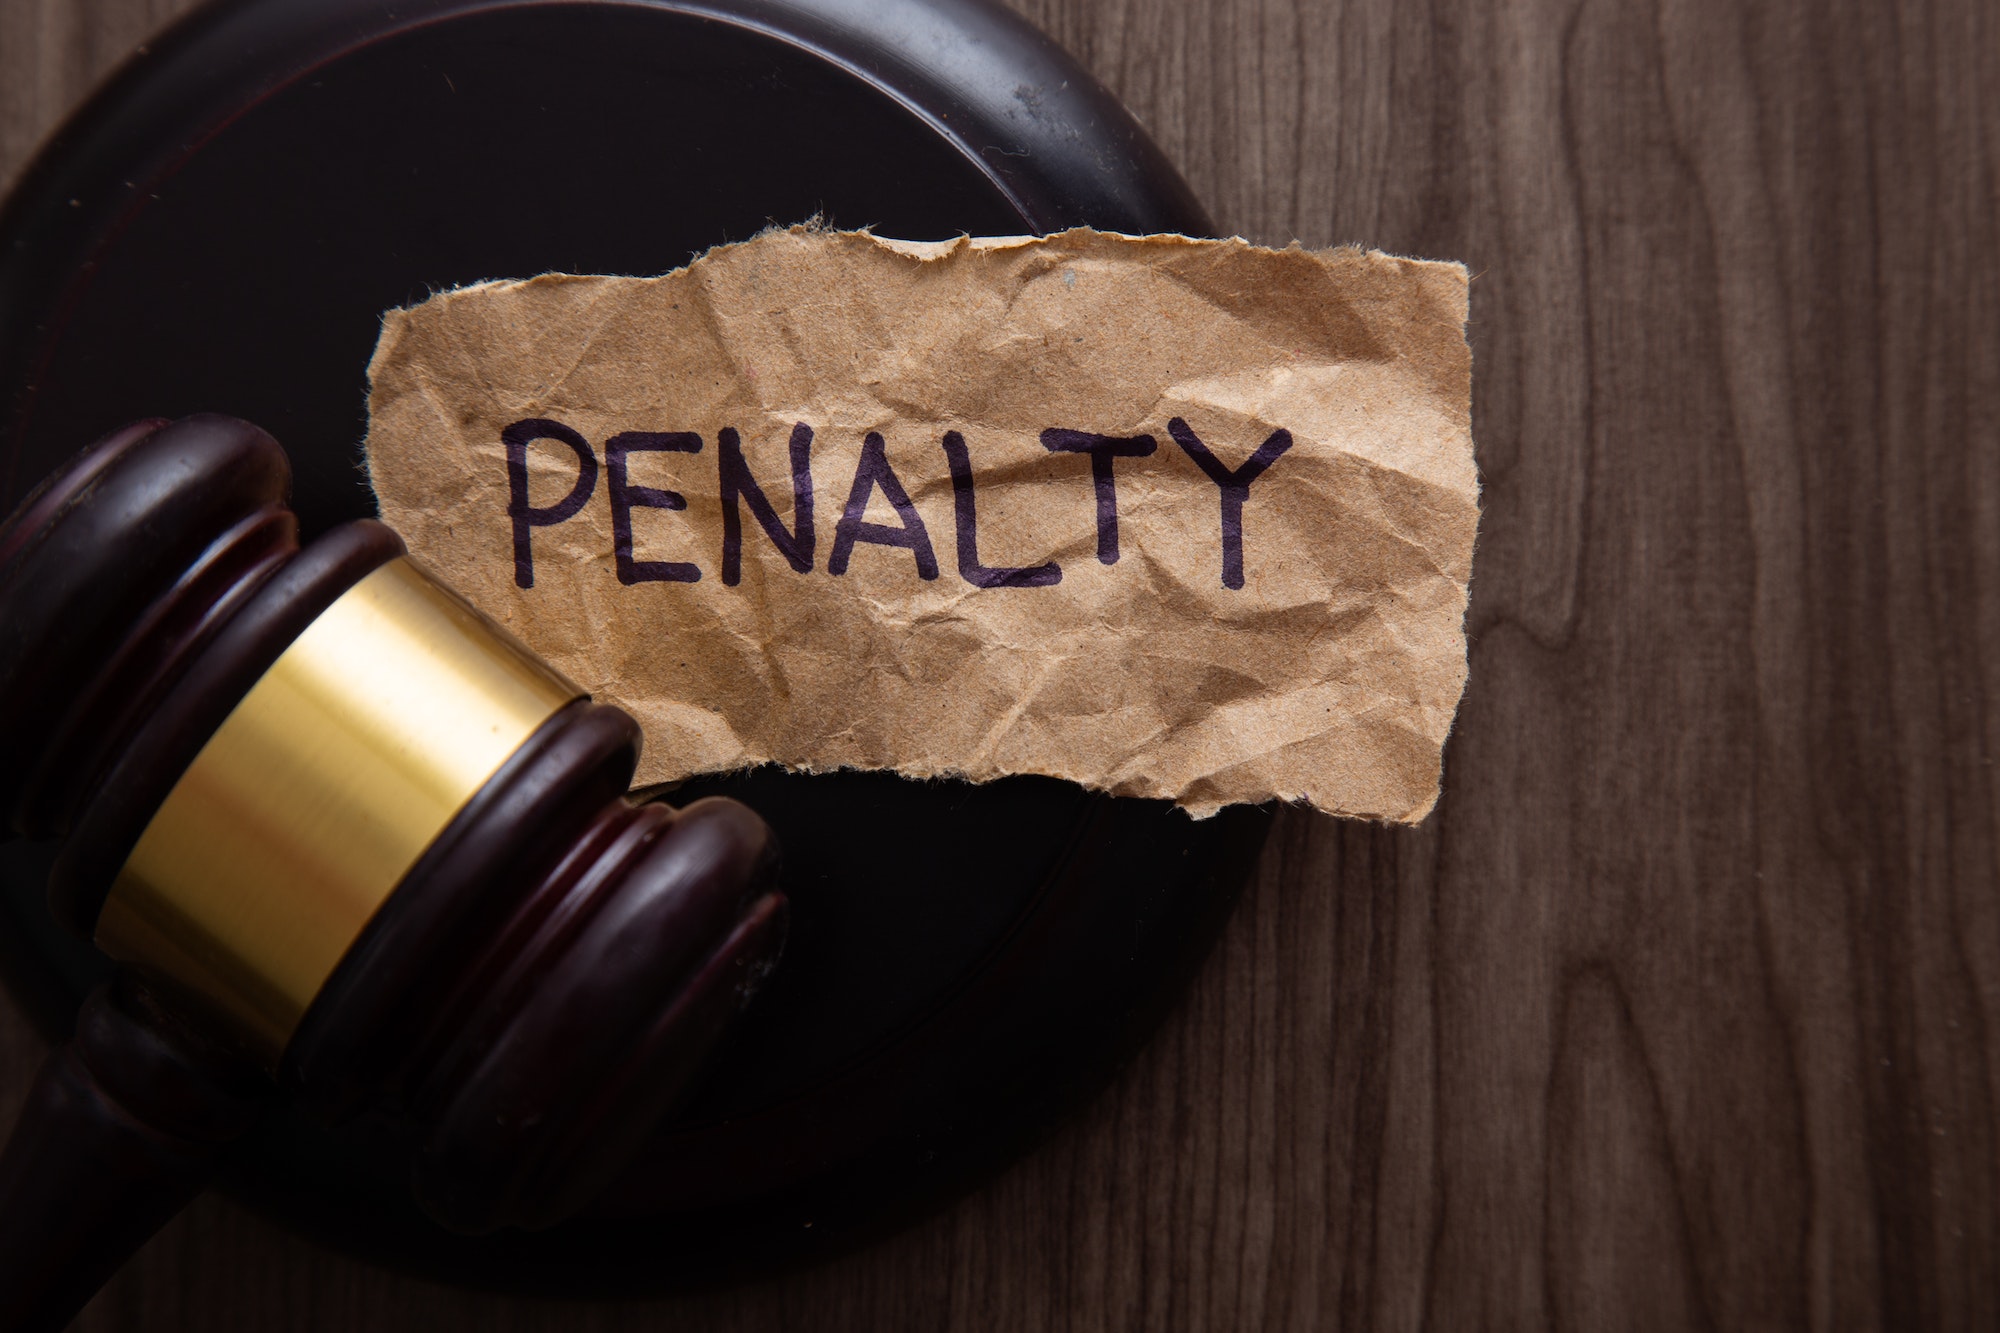 PENALTY wording with gavel on wooden background